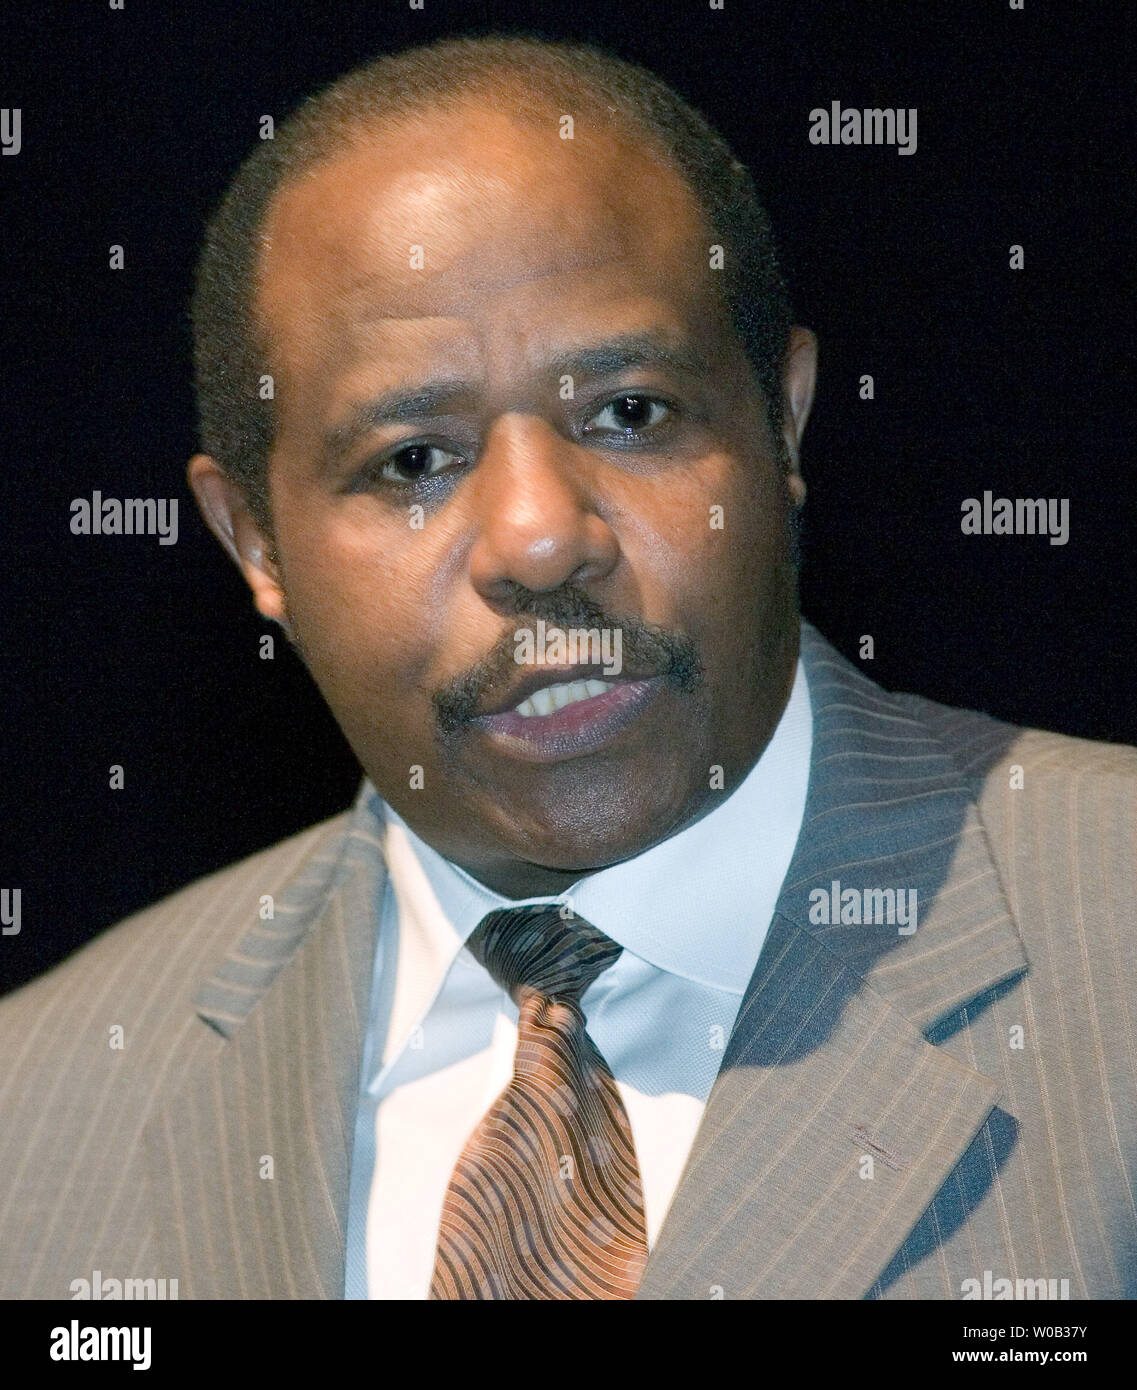 Paul Rusesabagina, the real-life inspiration for last years  Academy Award-nominated film 'Hotel Rwanda', gives a lecture at Vancouver's University of of British Columbia, Chan Center, January 8, 2006. A Hutu, Rusesabagina saved hundreds of Tutsis from genocide during Rwanda's civil war by sheltering them in the upscale hotel he worked for. (UPI Photo/Heinz Ruckemann) Stock Photo